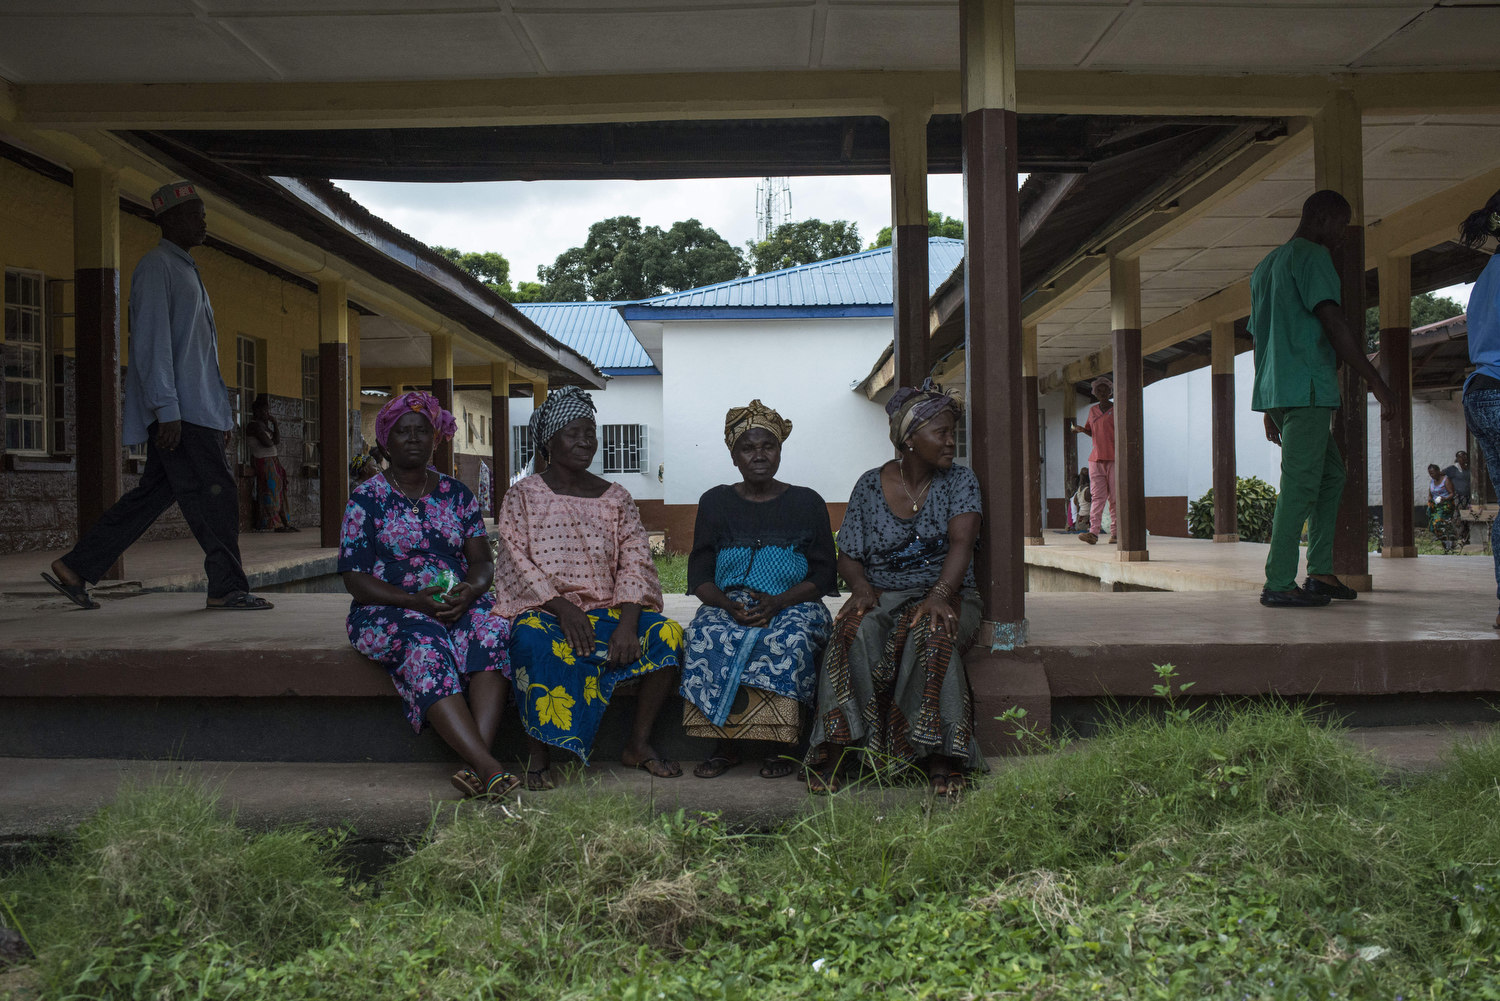  The family of Christiana Dasama,17  waits for her to leave surgery after giving birth at Kenema Government Hospital in Kenema, Sierra Leone on November 11th, 2015. 